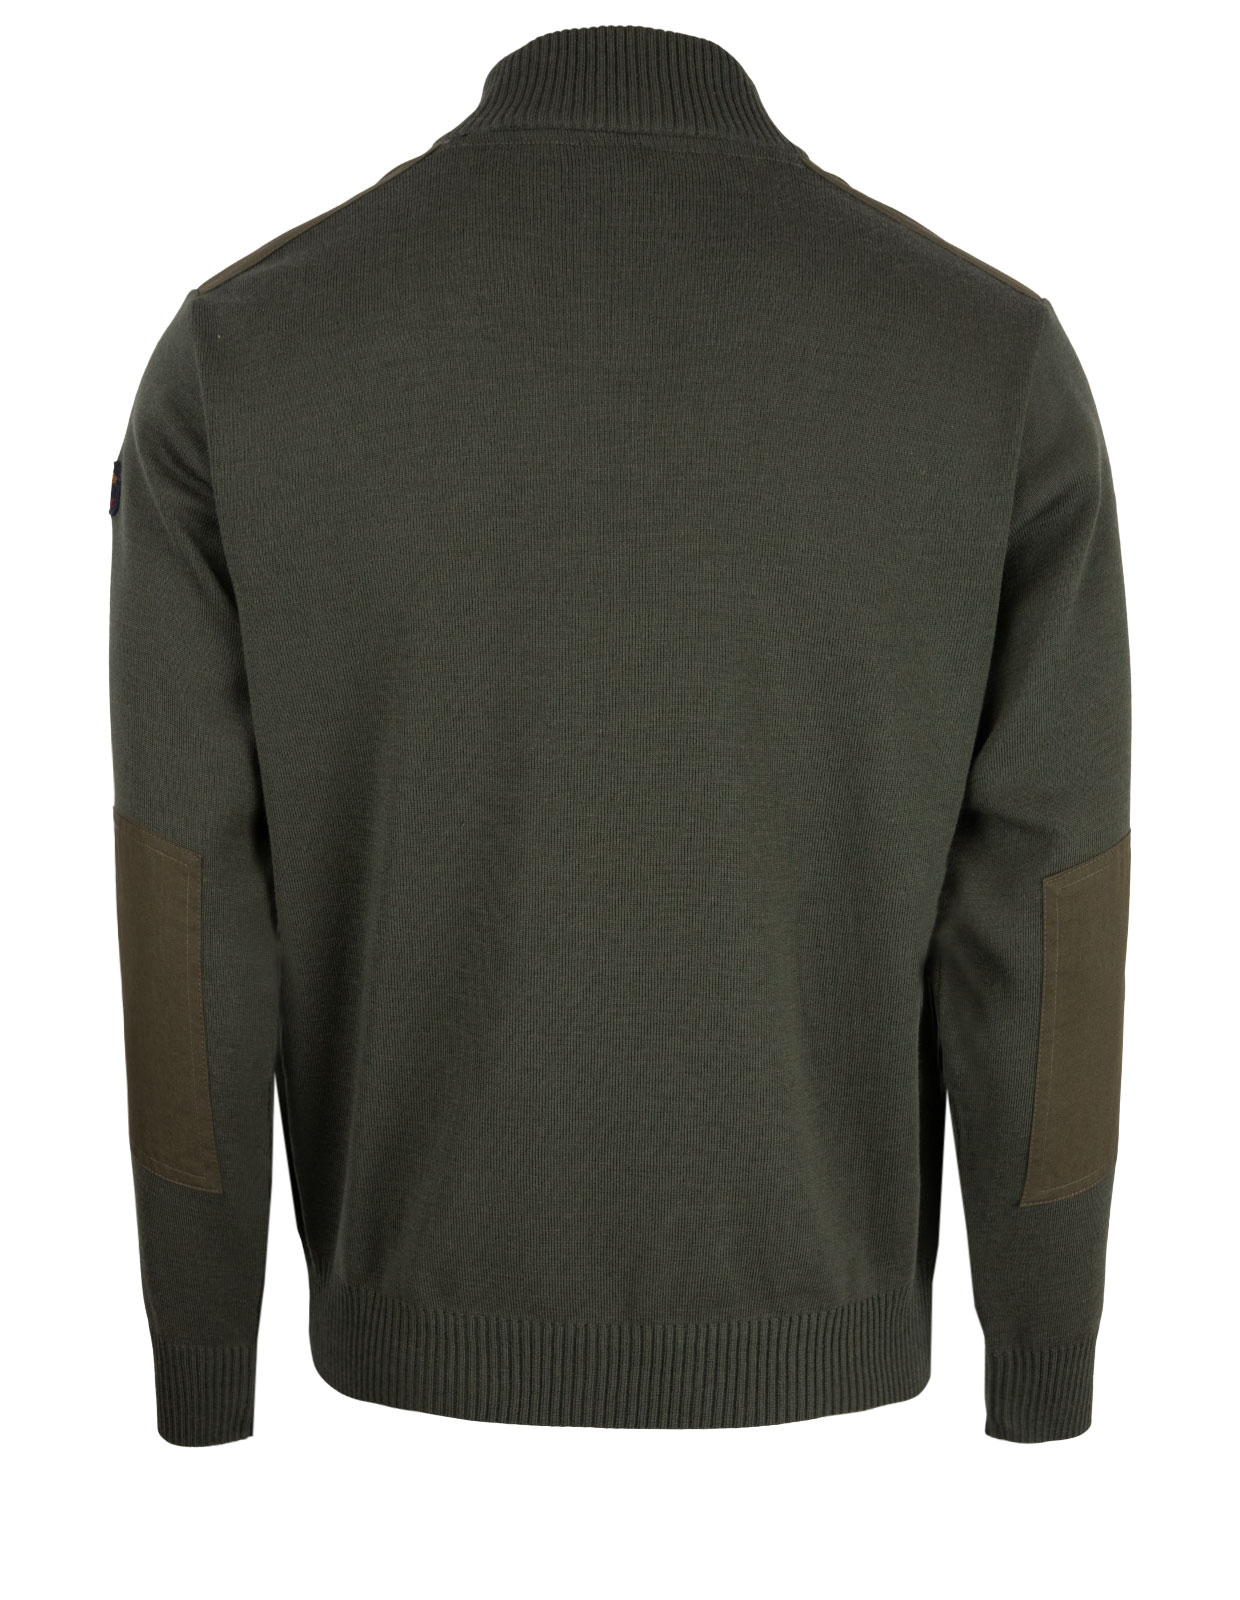 Yachting Wool Turtleneck Sweater Olive Stl XL